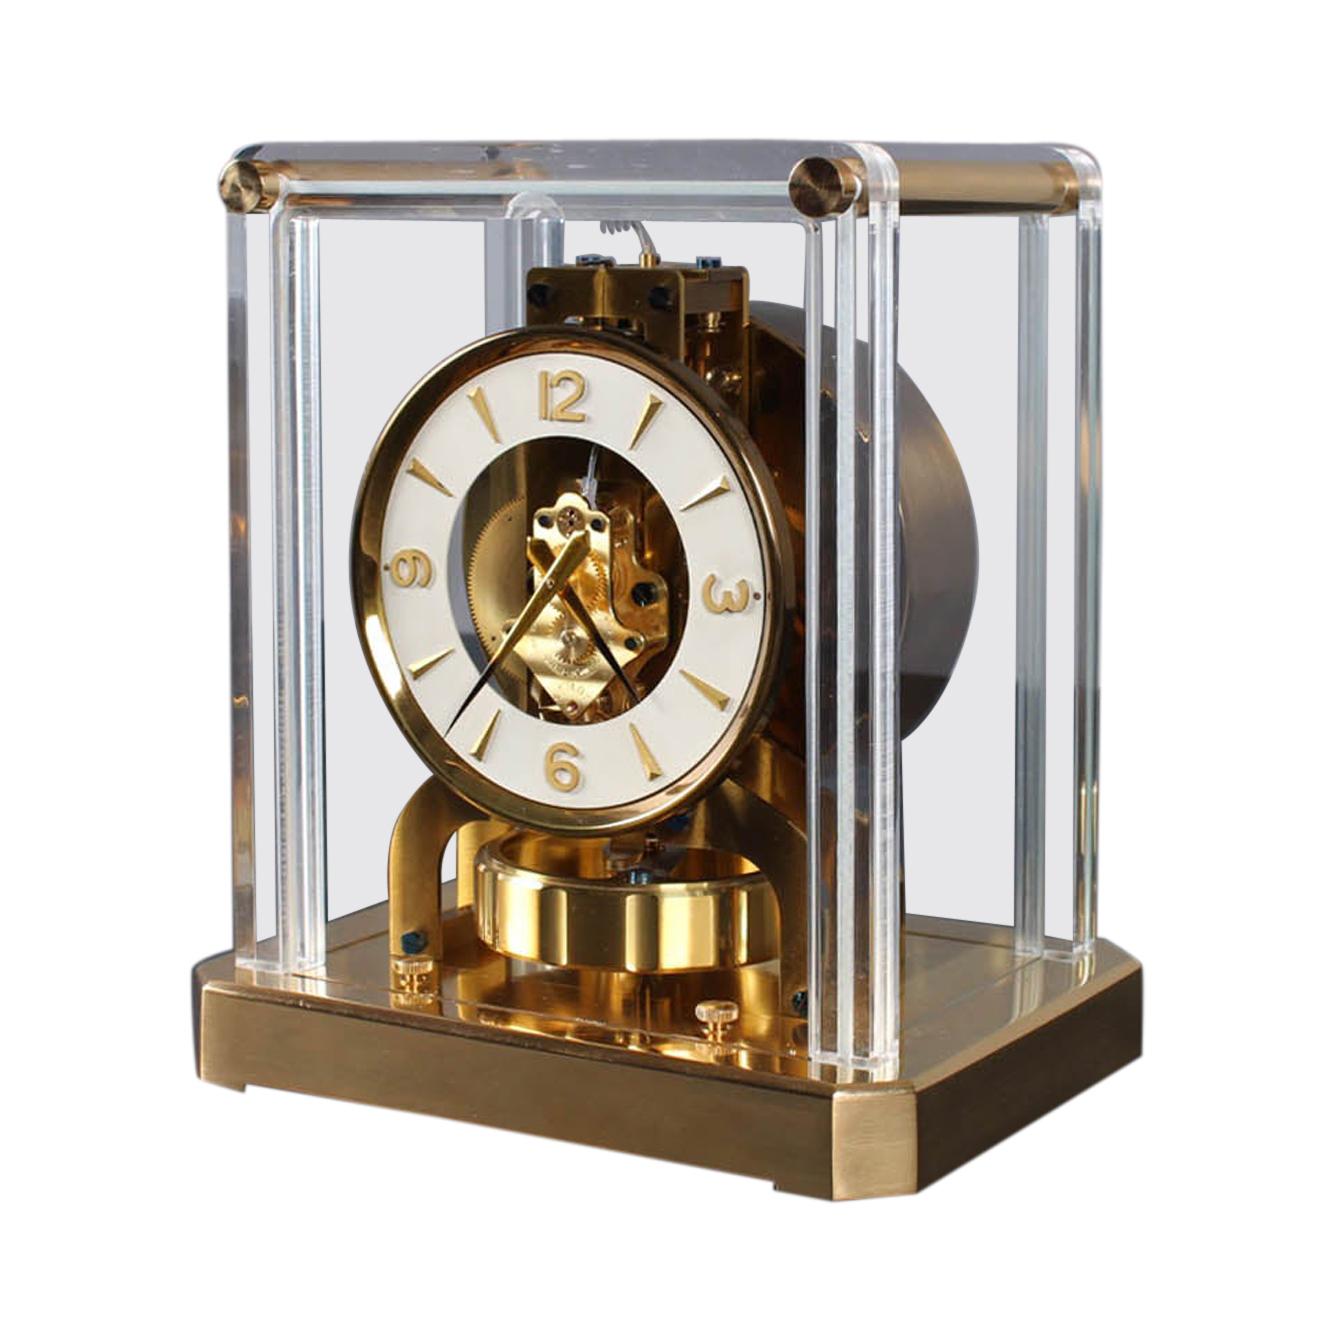 JAEGER LE COULTRE ATMOS CLOCK ORIGINAL 528-8 FRONT GLASS NEW WITH GOLD KNOB 